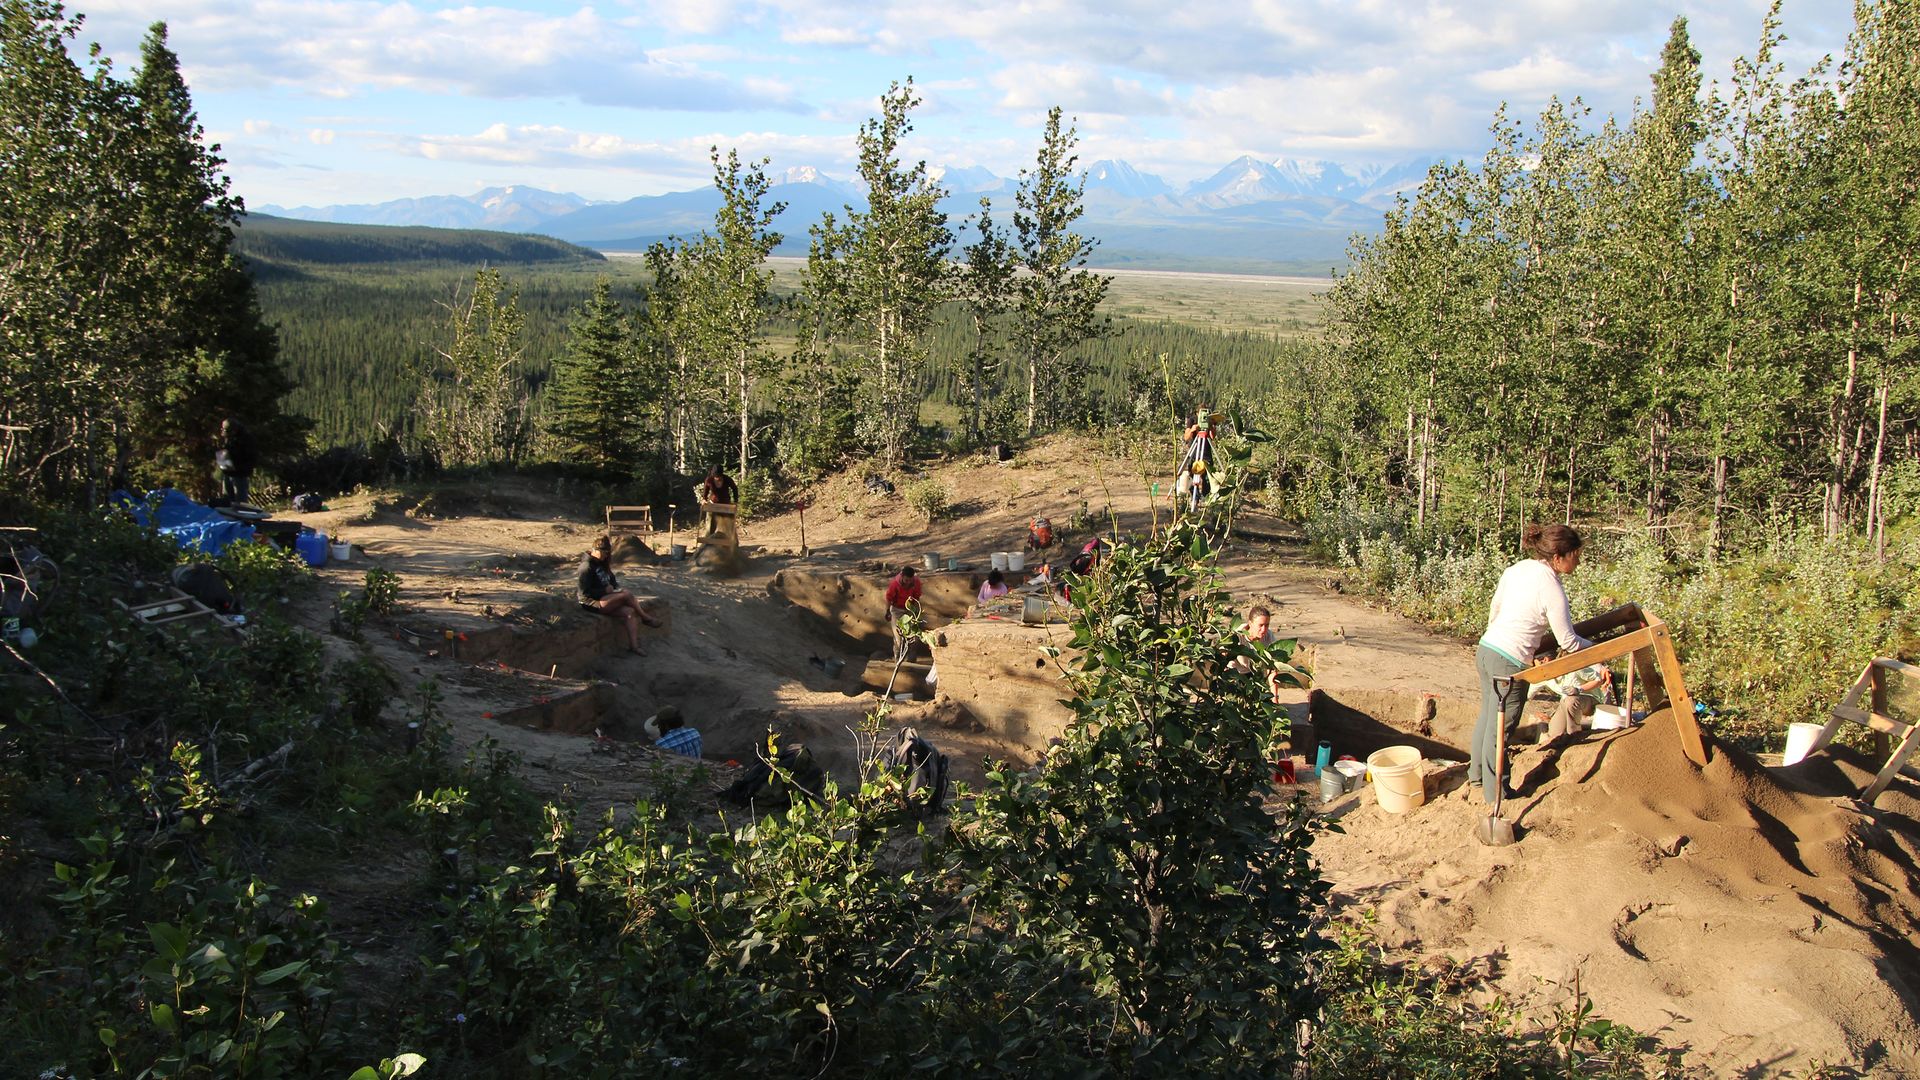 Early excavation site in Beringia with mountains in the background